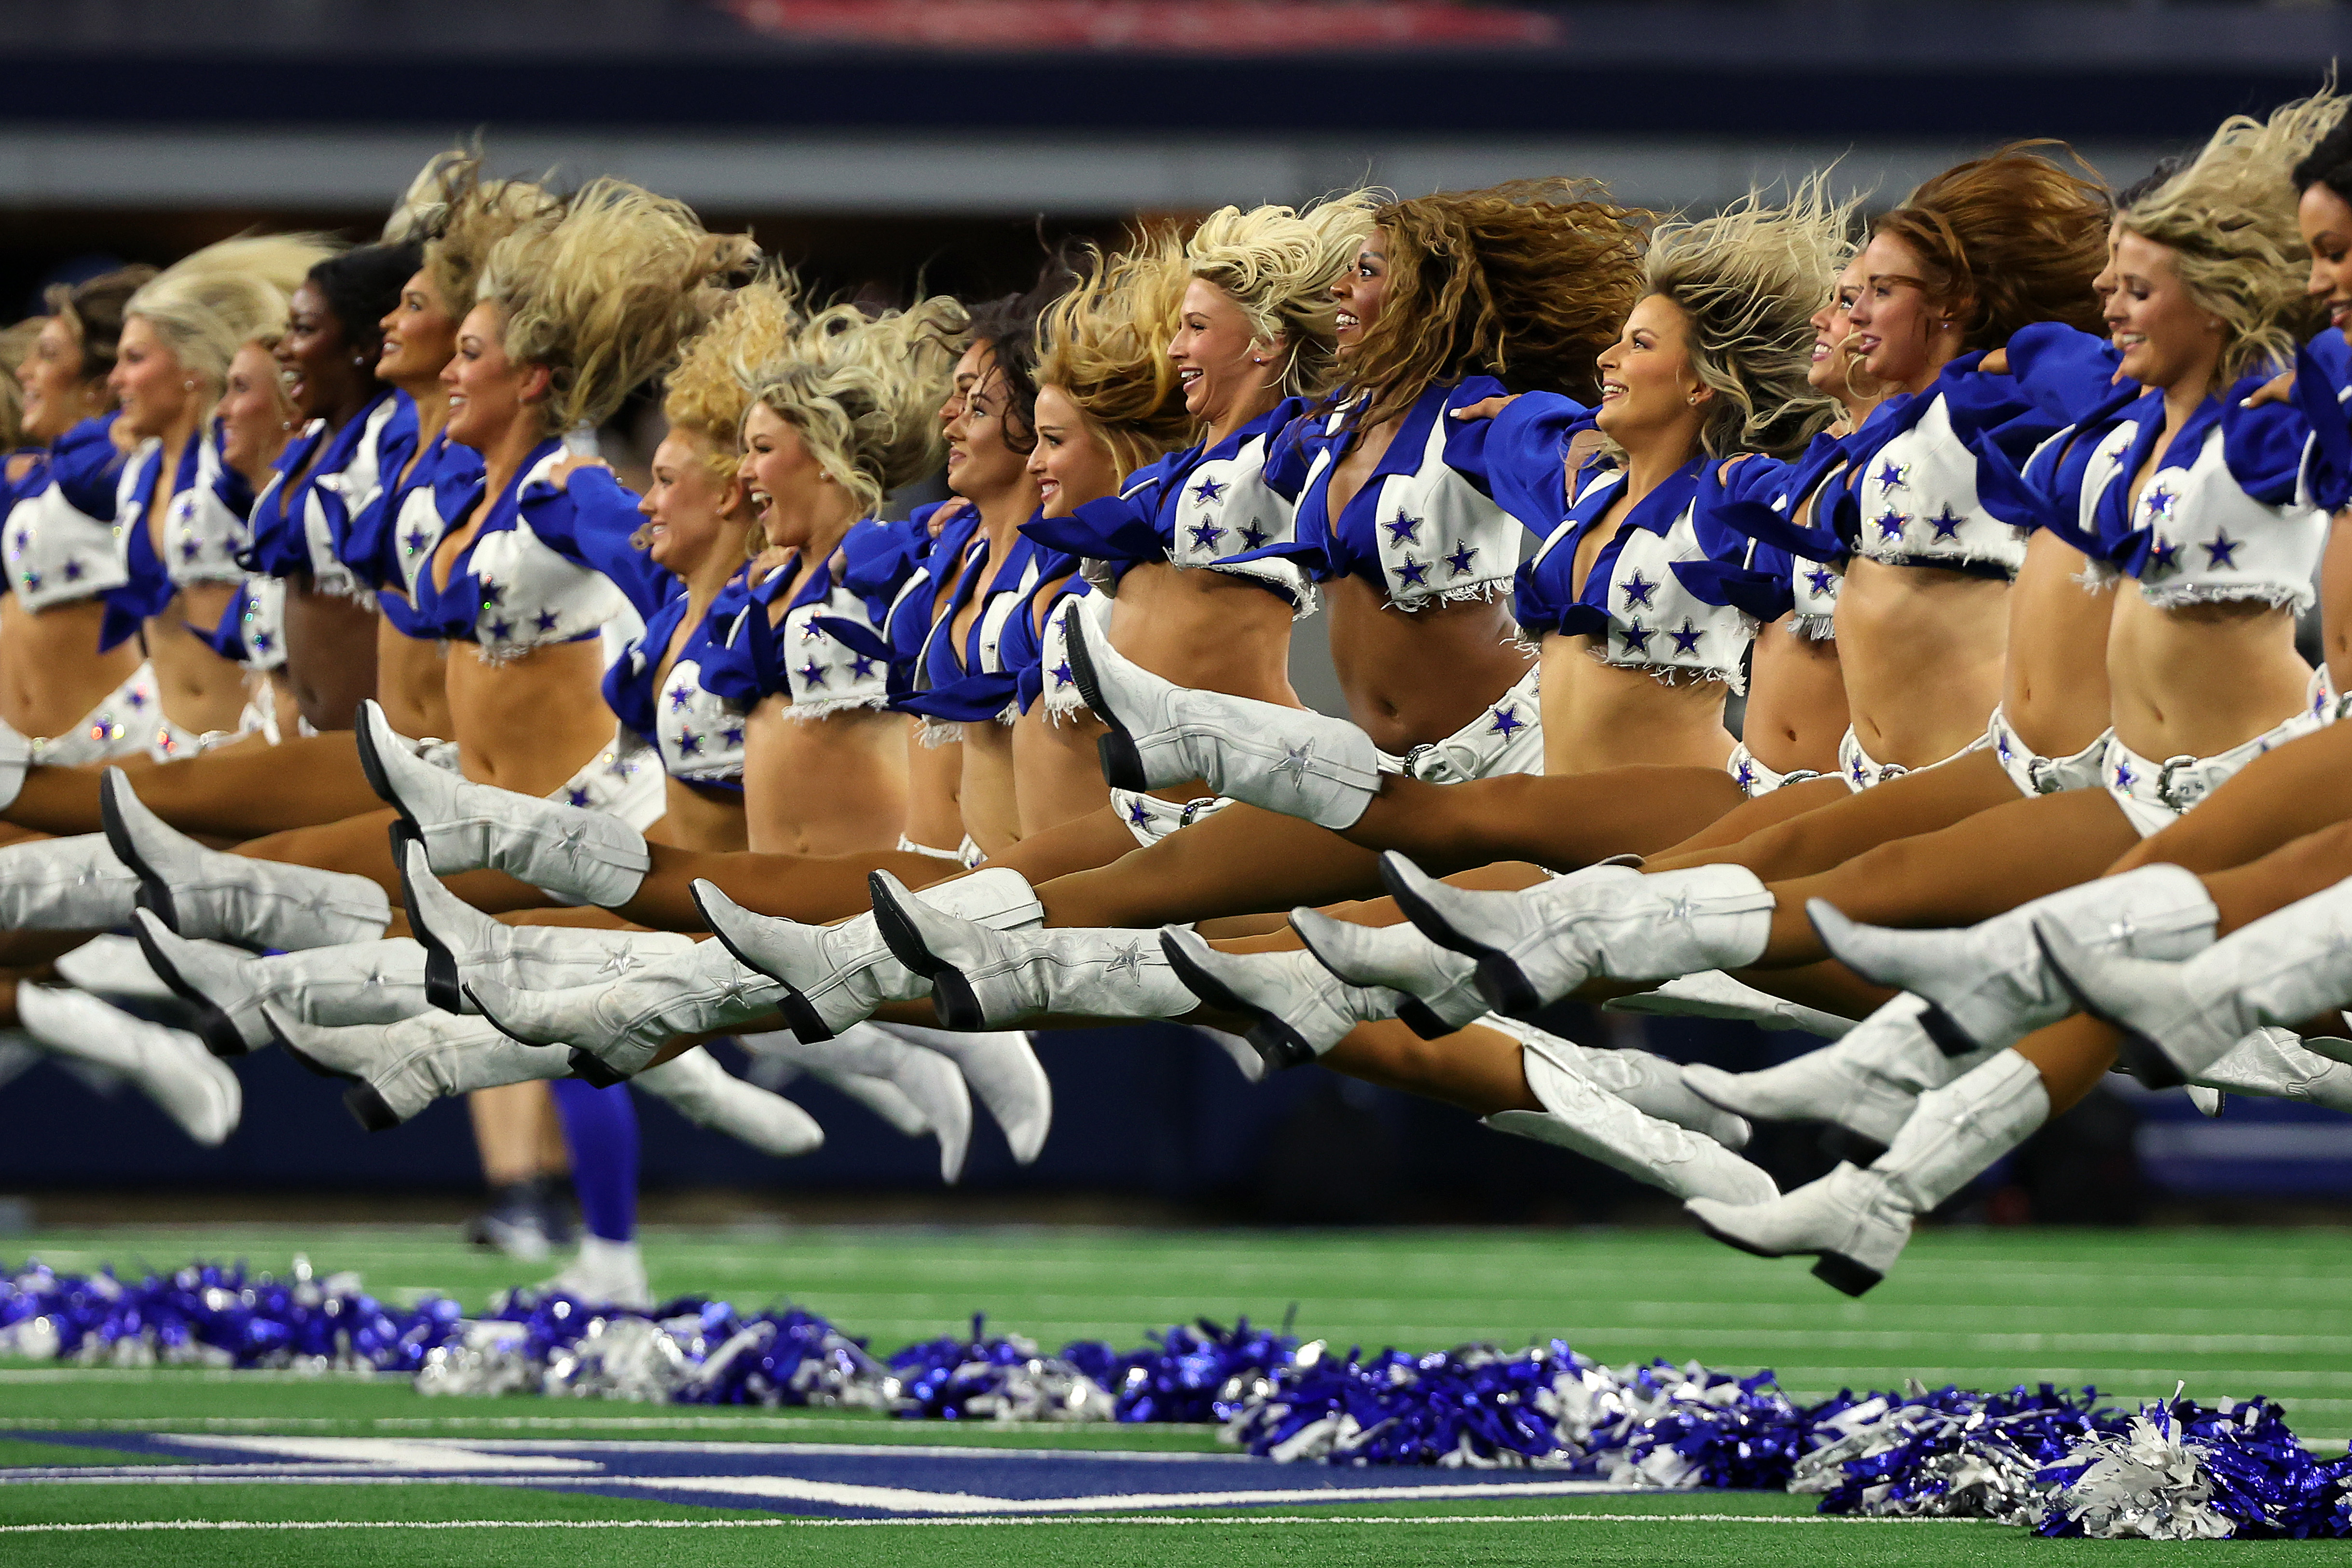 Secrets about the Dallas Cowboys Cheerleaders straight from the squad